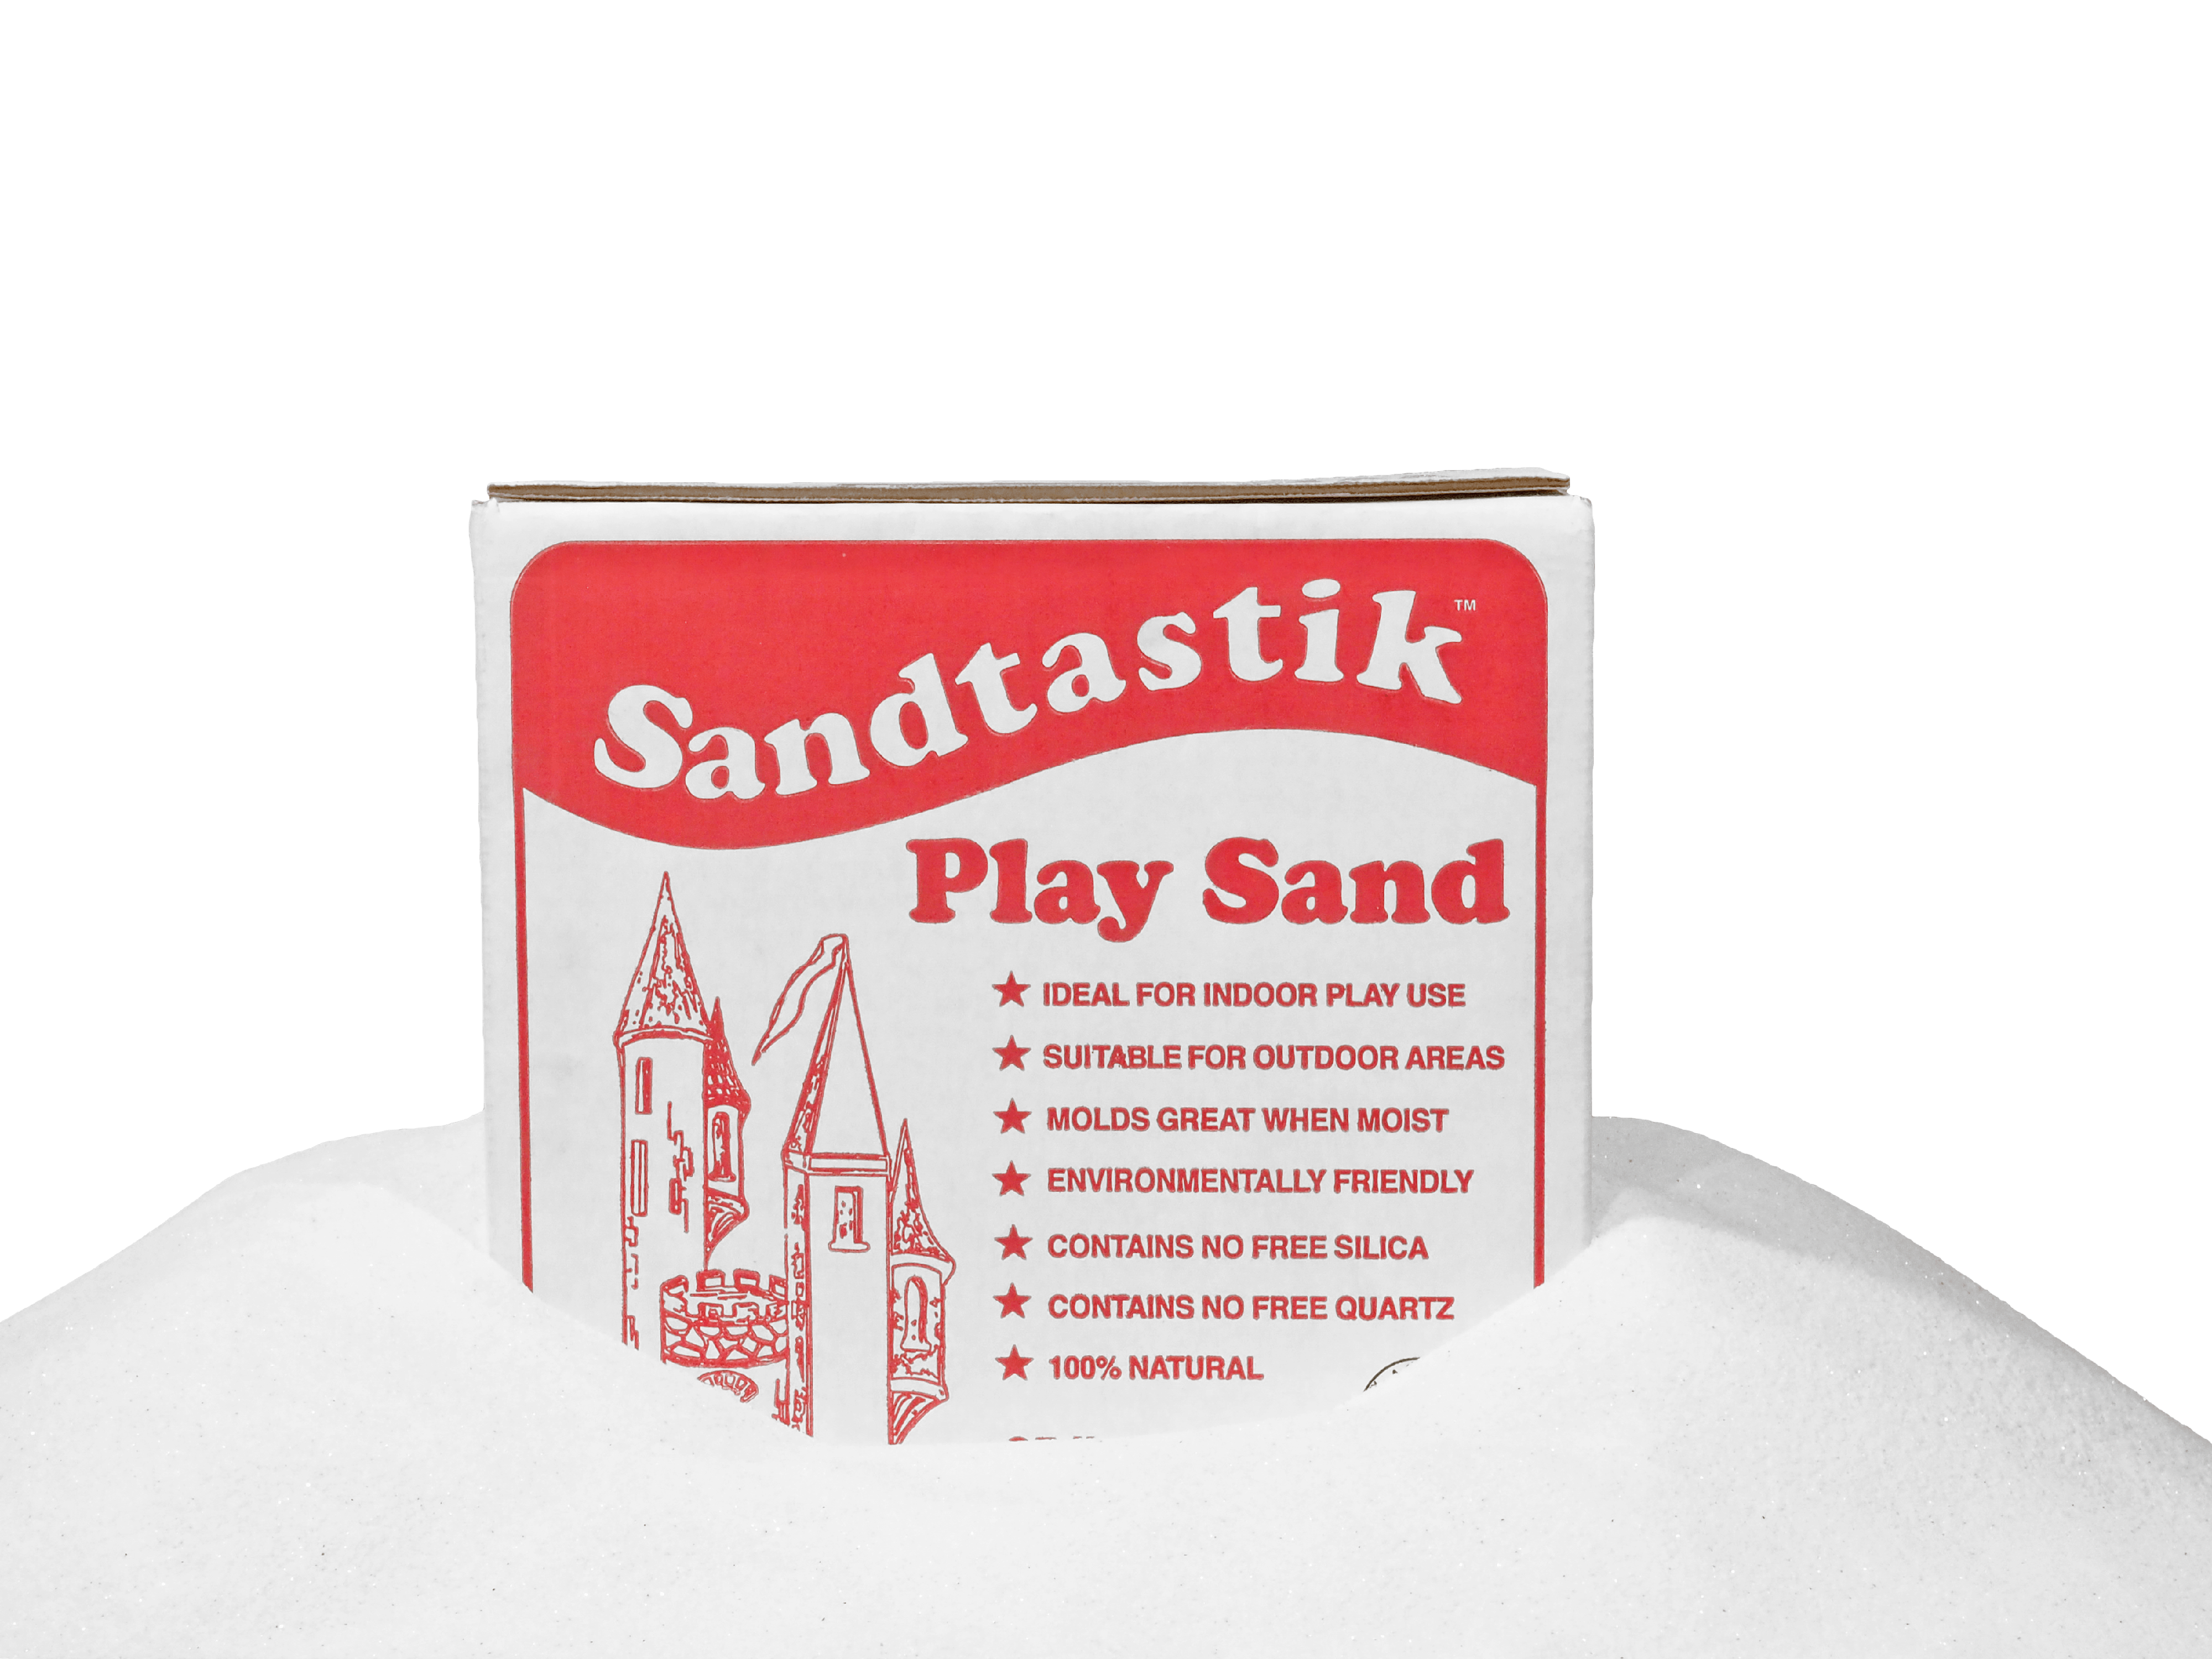 Sandtastik Products White Play Sand 25 Pounds - image 2 of 6